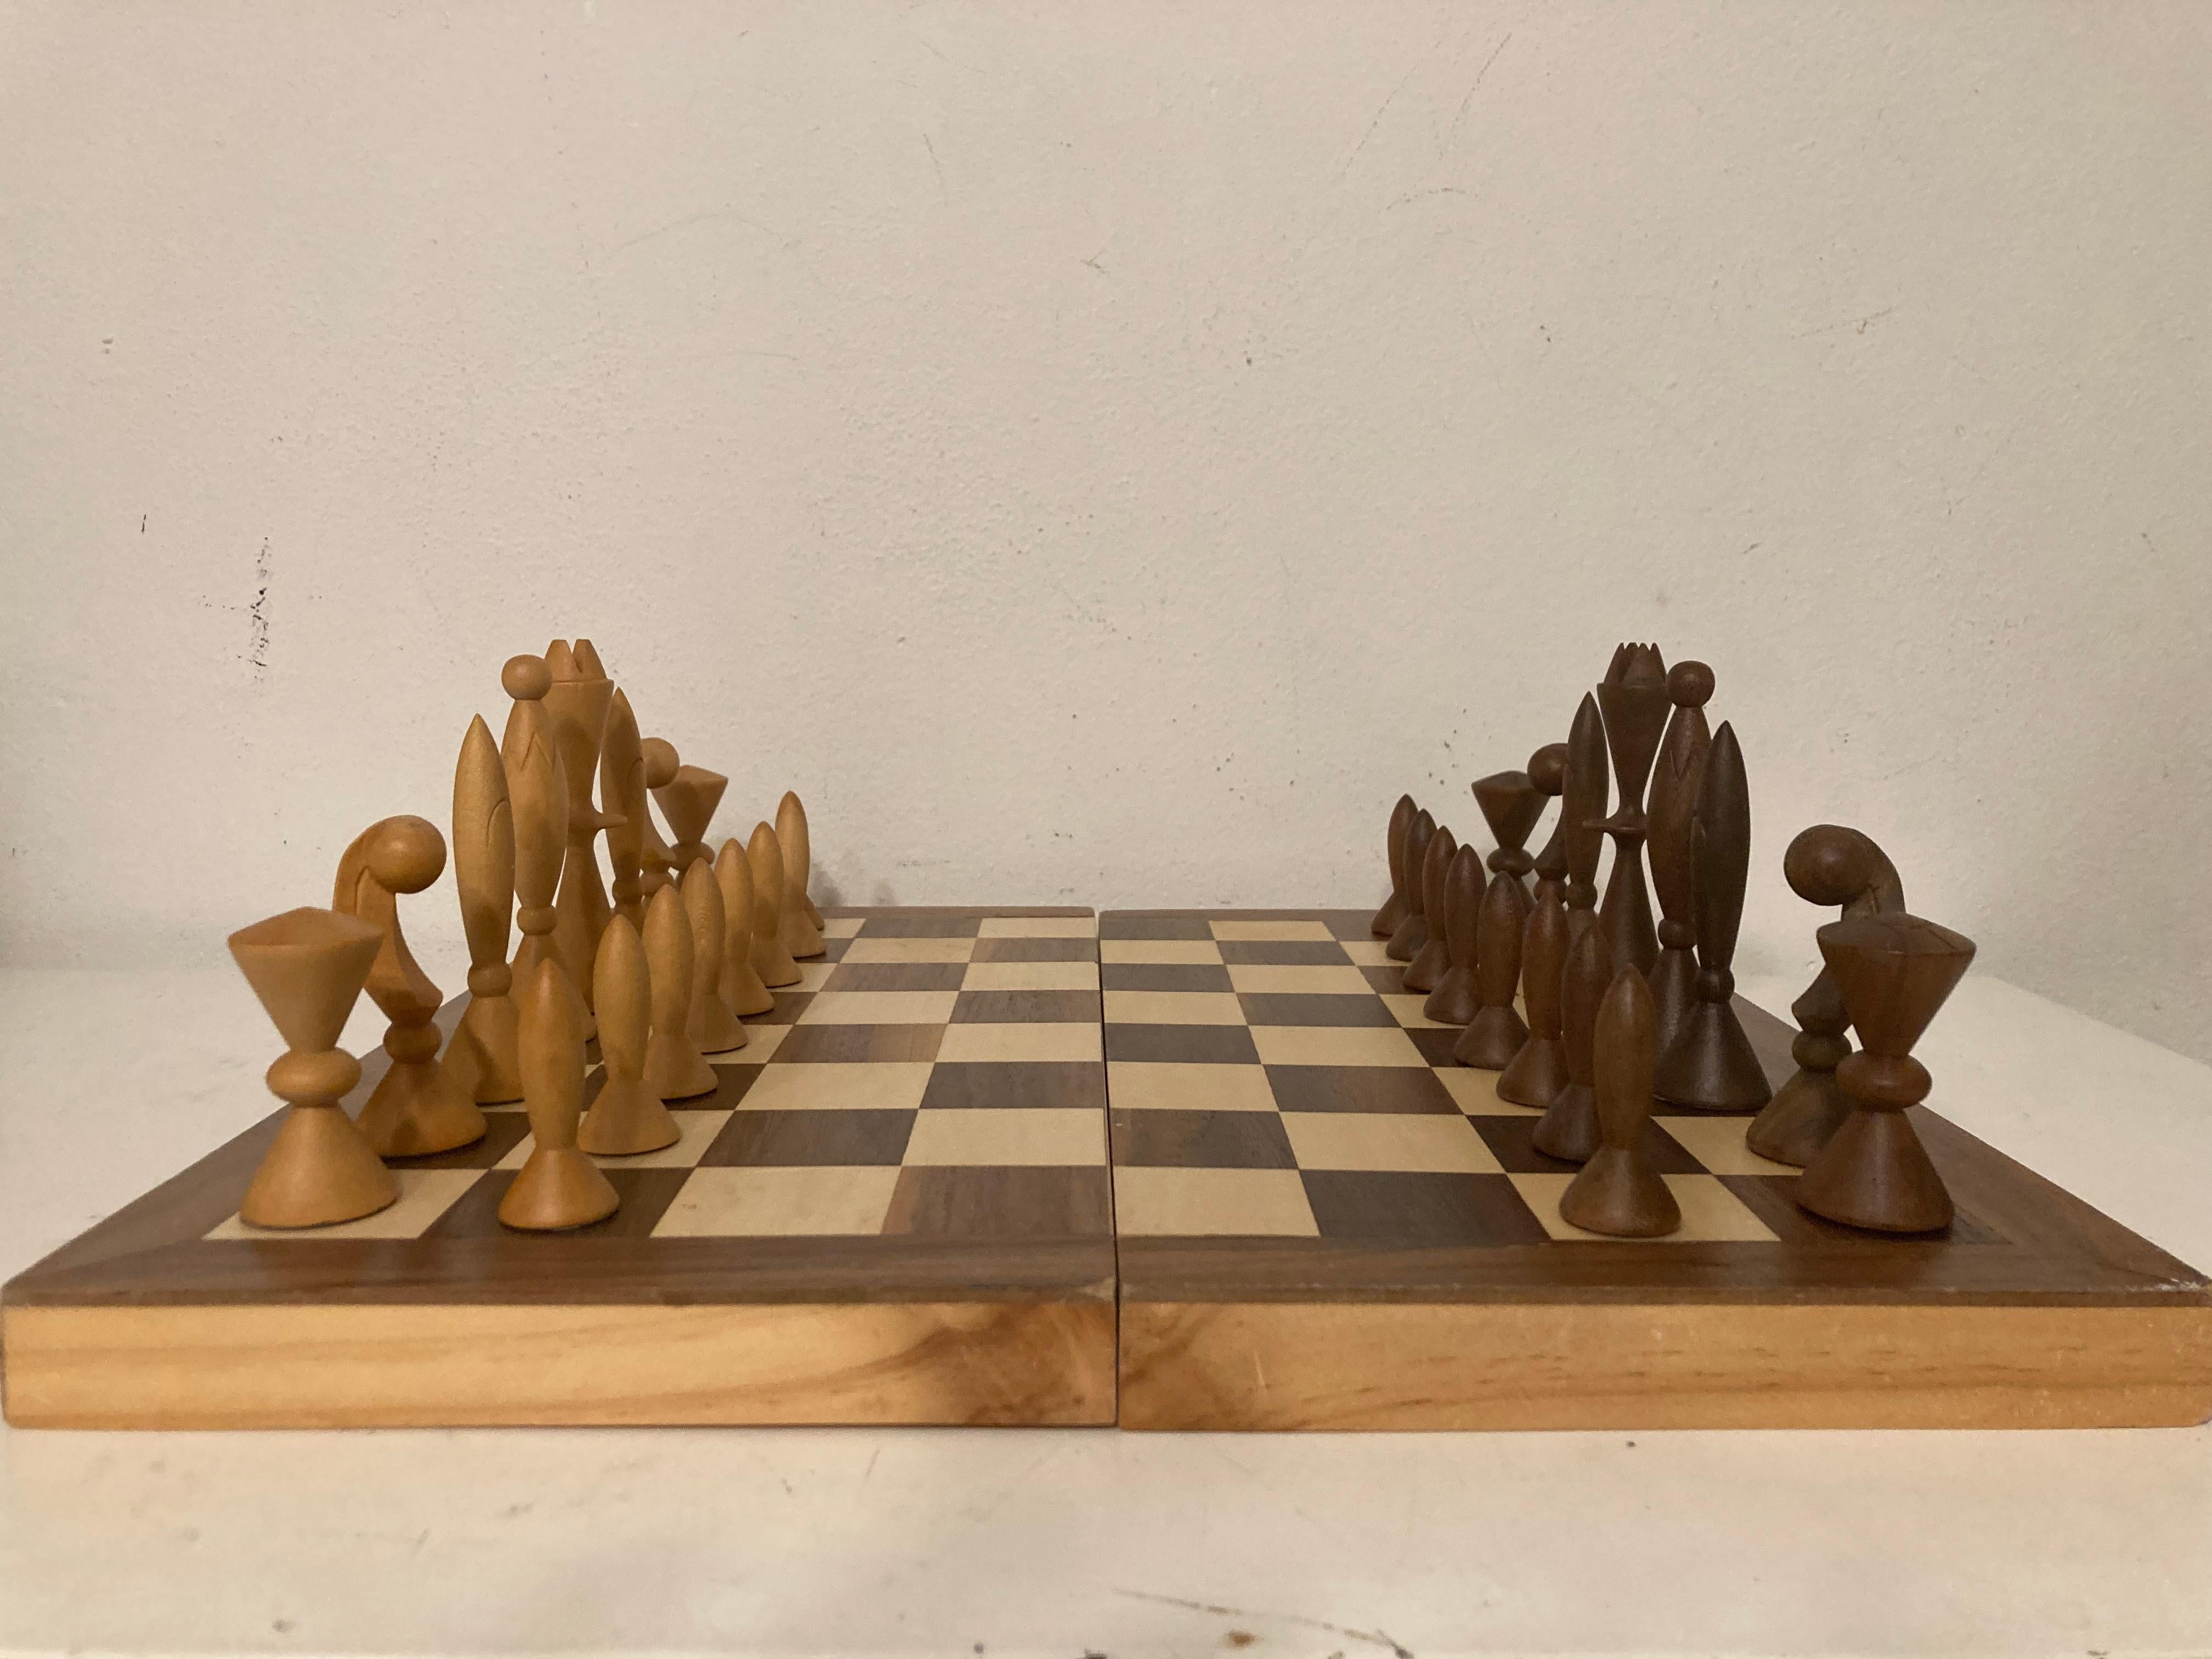 Anri space age chess set Designed by Elliott, walnut and maple. Made in Italy. The set comes without chess board. The board in the pictures is not original and serves as example only.